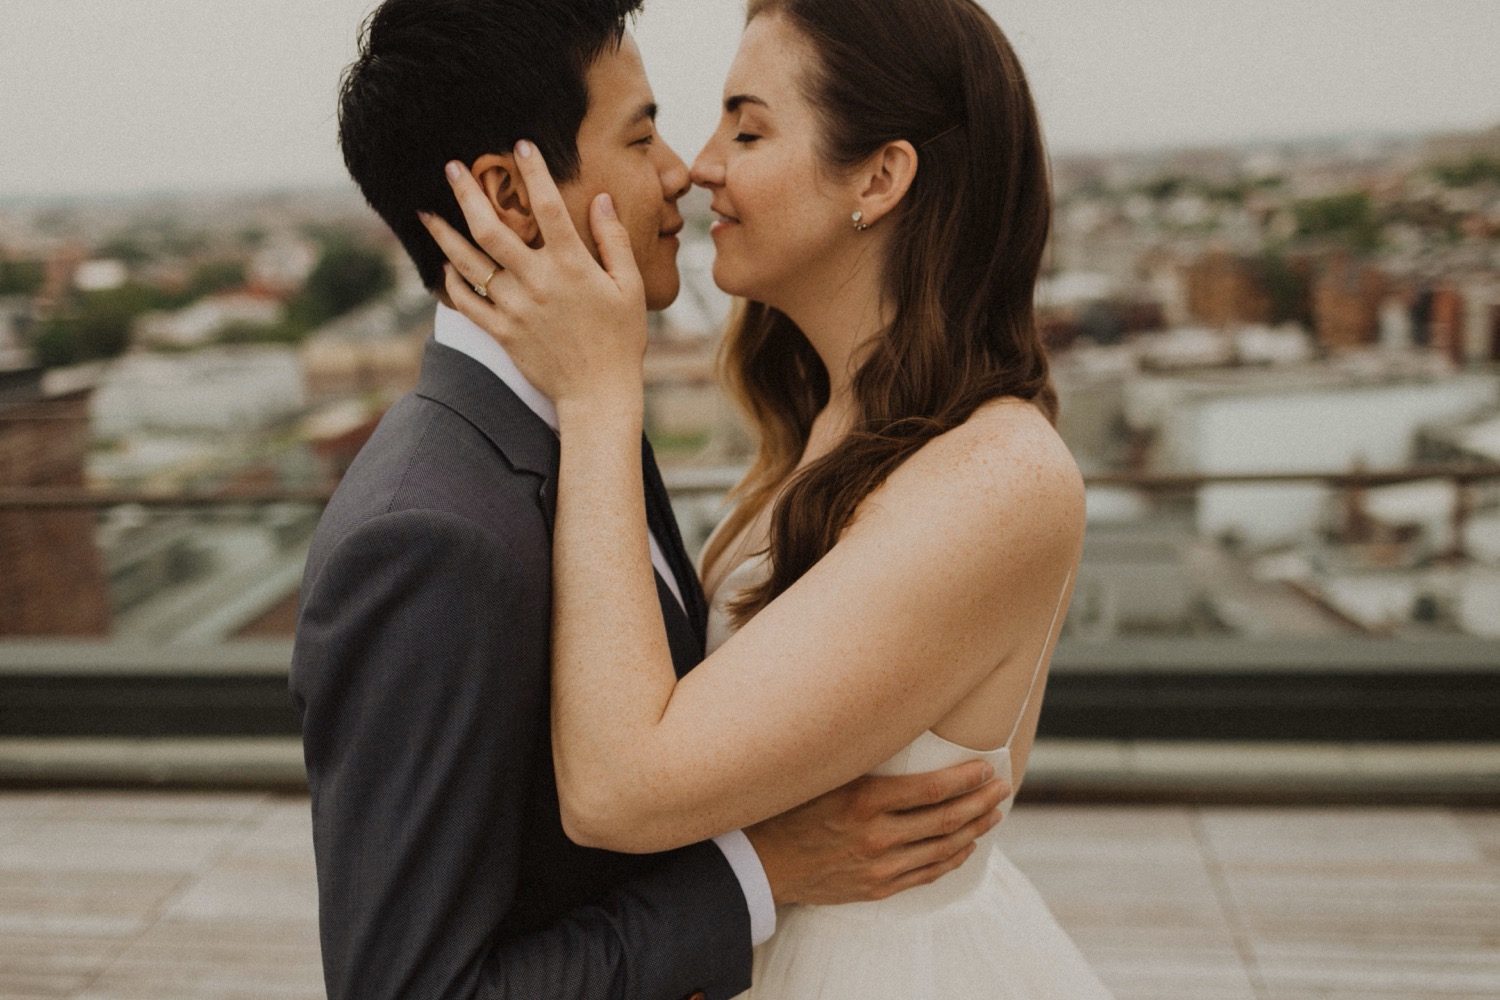 Bride and groom eskimo kiss at the line dc hotel rooftop